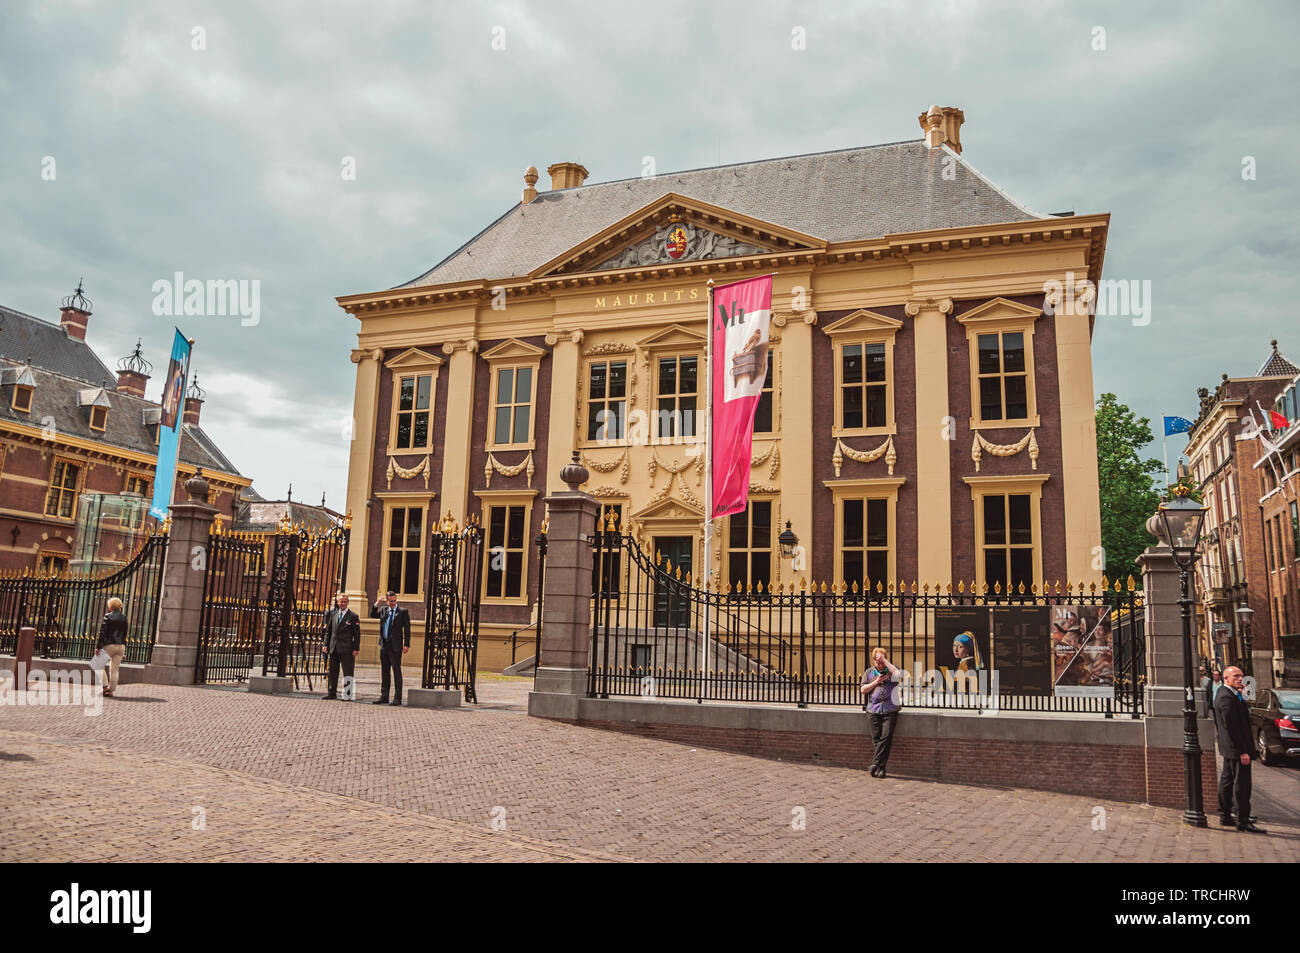 People and Mauritshuis House, museum with Dutch Golden Age paintings at The Hague. Is a mix of historic city with modernity in Netherlands. Stock Photo